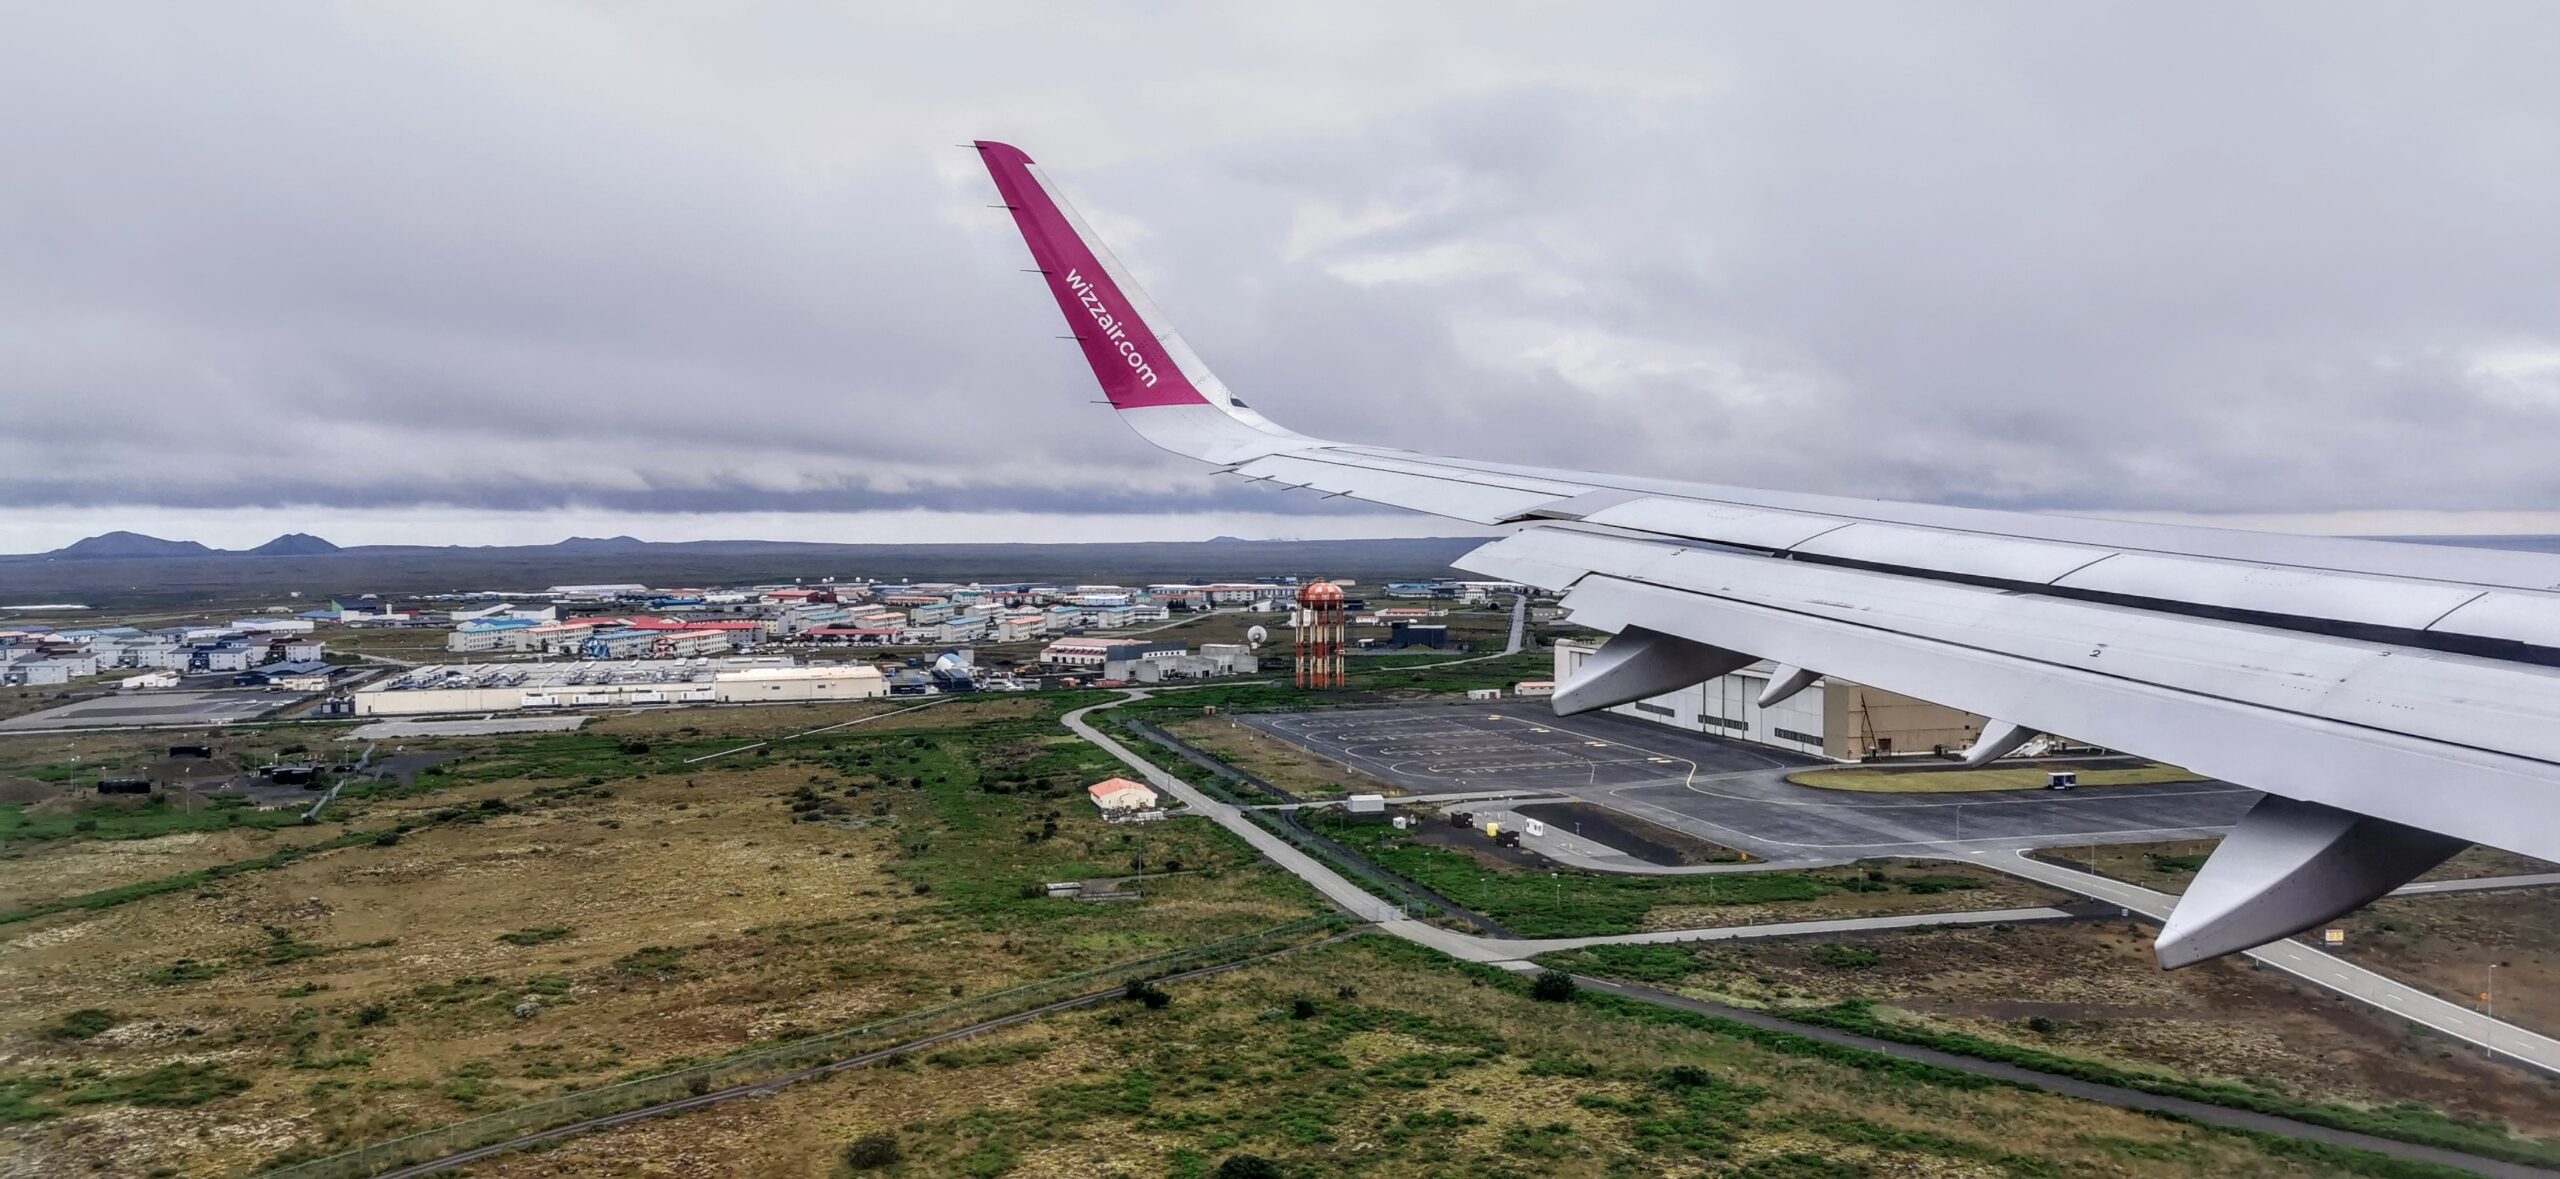 Cheap tickets Wizzair canceled